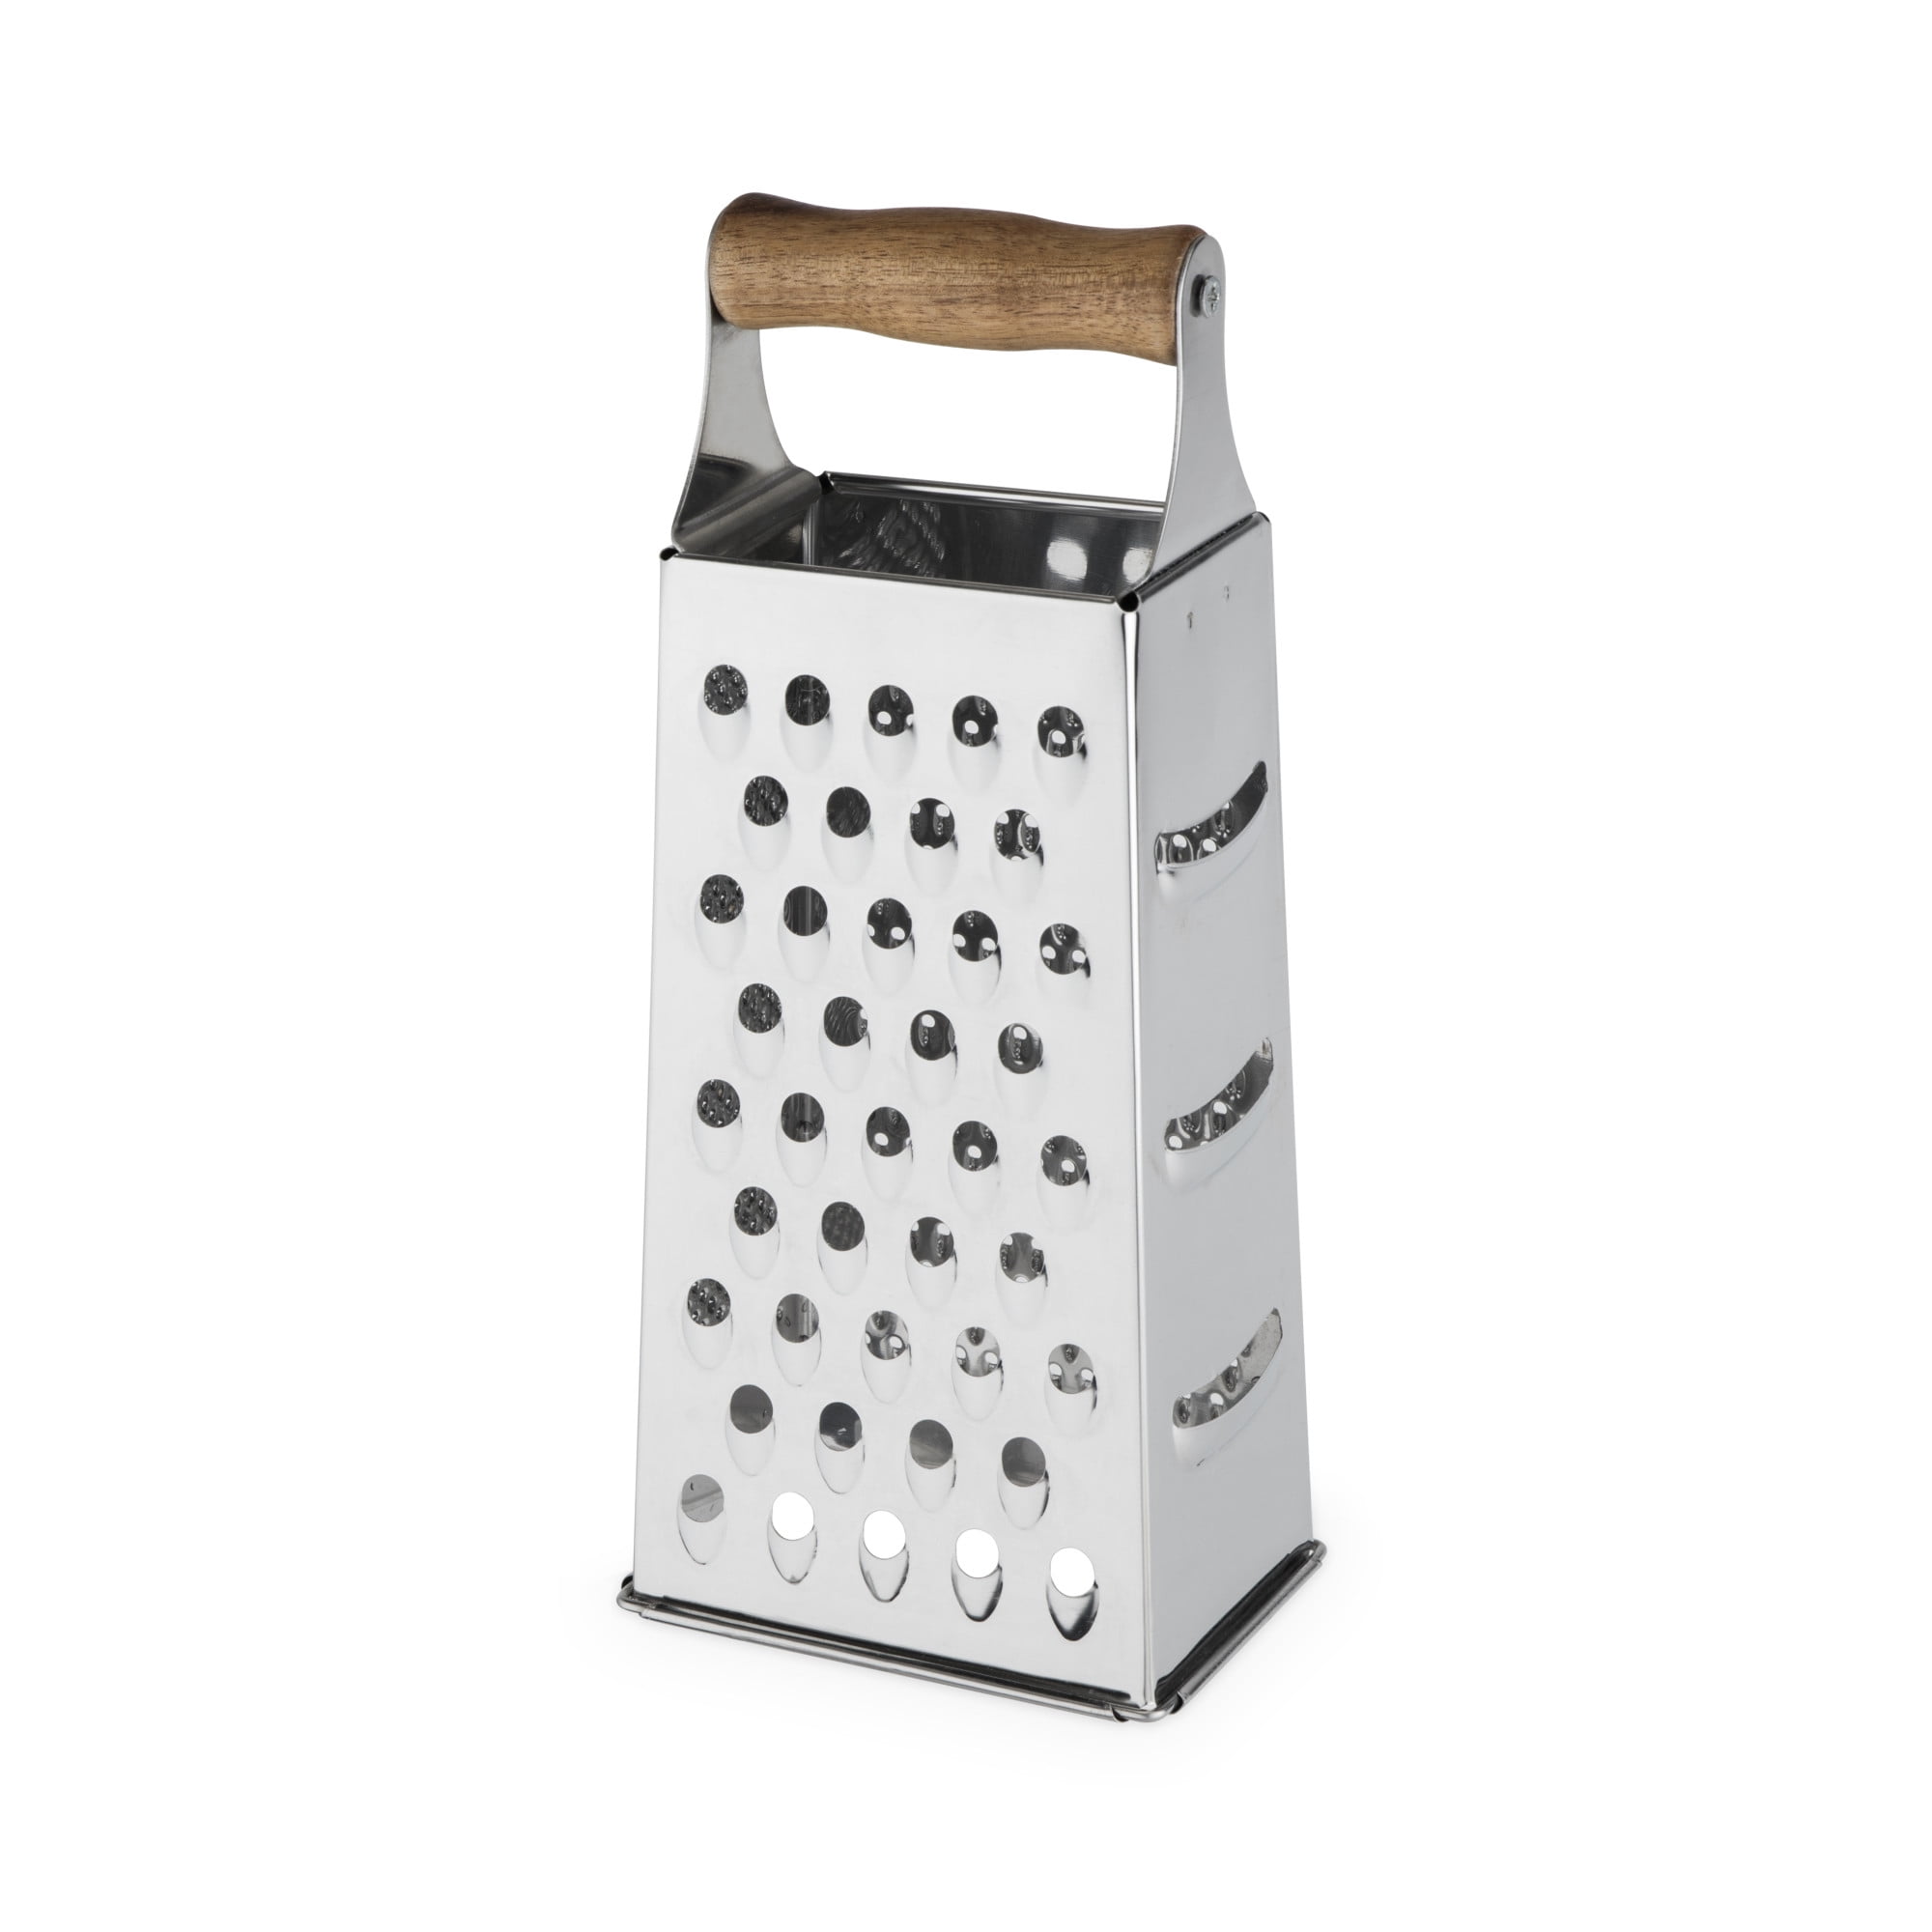 Stainless Steel Cheese Grater with Microswitch and comes with a